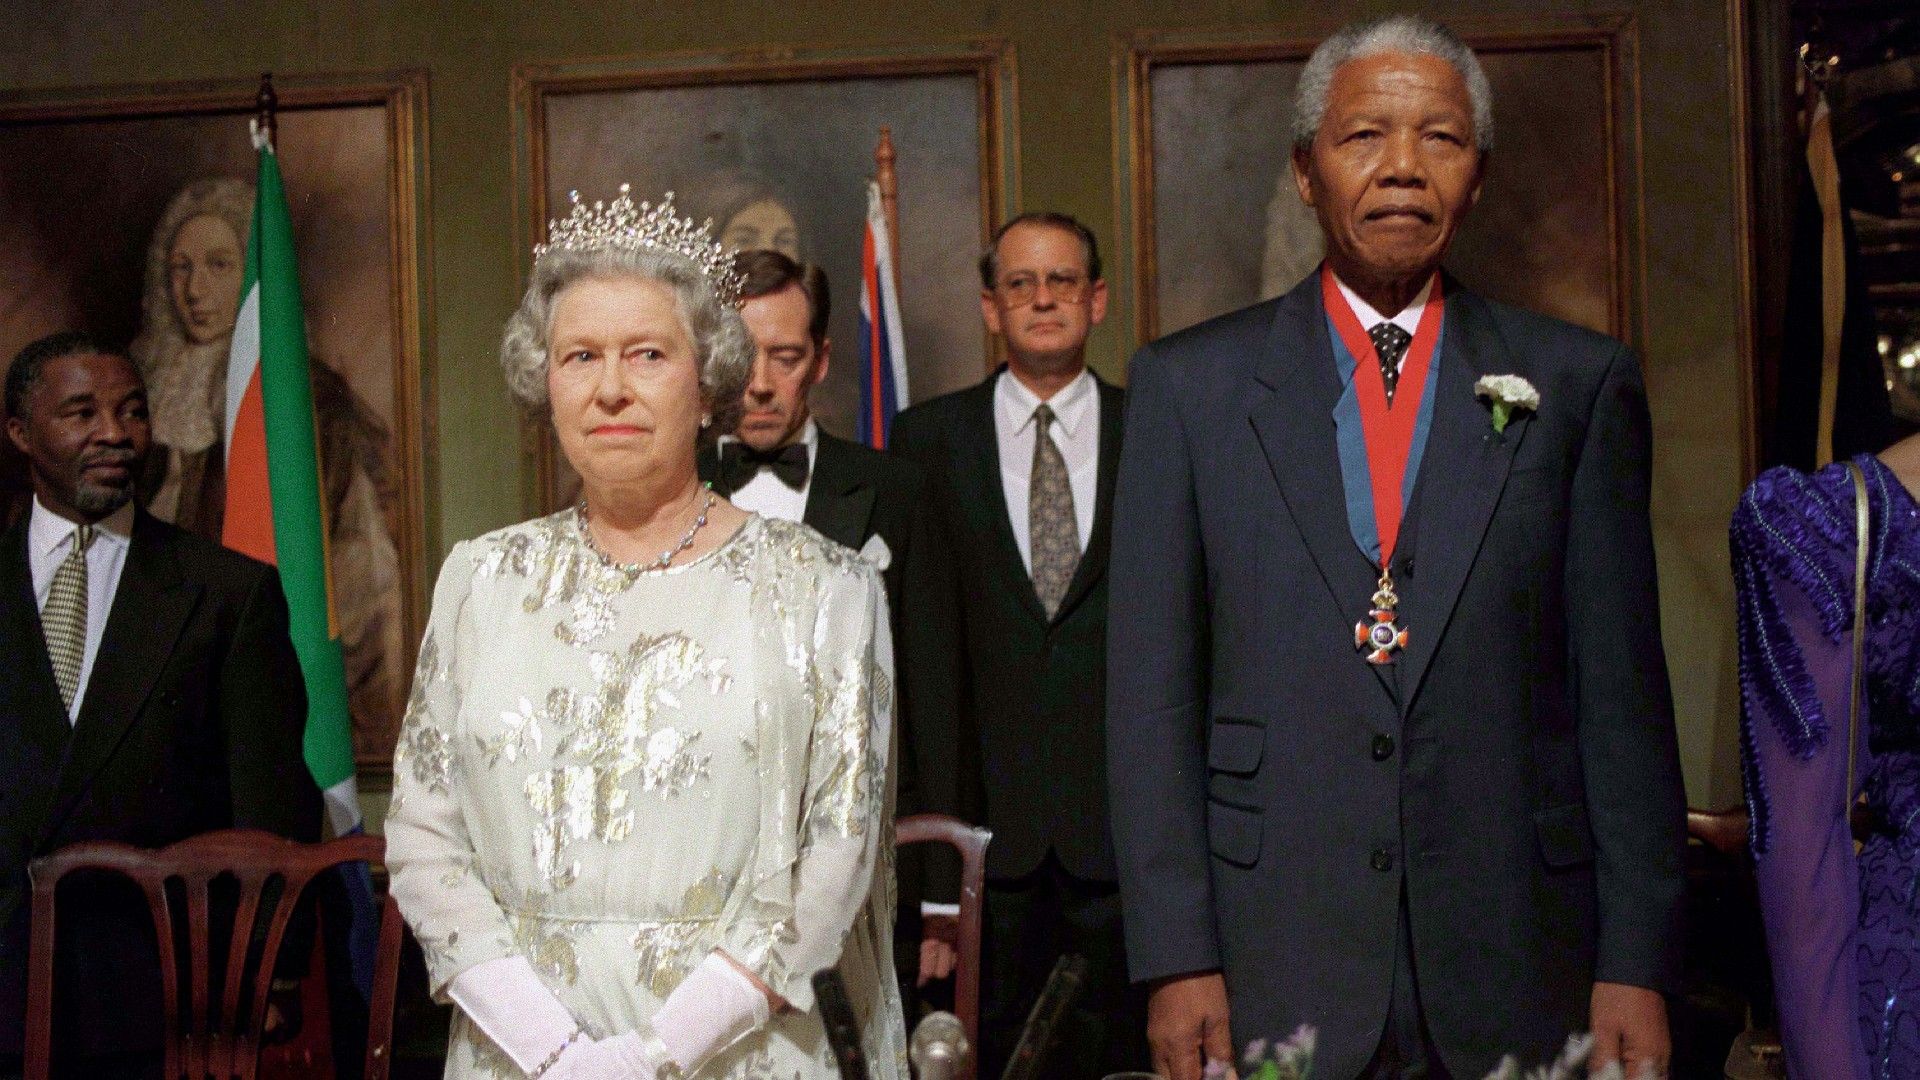 <p>                     In 1995, Queen Elizabeth II, accompanied by Prince Philip, made her first official visit to South Africa as monarch – though she had visited previously in 1947, before she became Queen. The Queen was unable to take any visits to the country before the 90s, due to the ongoing apartheid there.                   </p>                                      <p>                     However, in 1995, Queen Elizabeth and Philip were invited by President Nelson Mandela to visit once again. Though the pair had met in Zimbabwe five years prior, this trip was the first time that Mandela had officially hosted the monarch. The visit was just a year after Mandela had been elected as President, so it was certainly a significant moment to see the meeting of two highly revered public figures.                   </p>